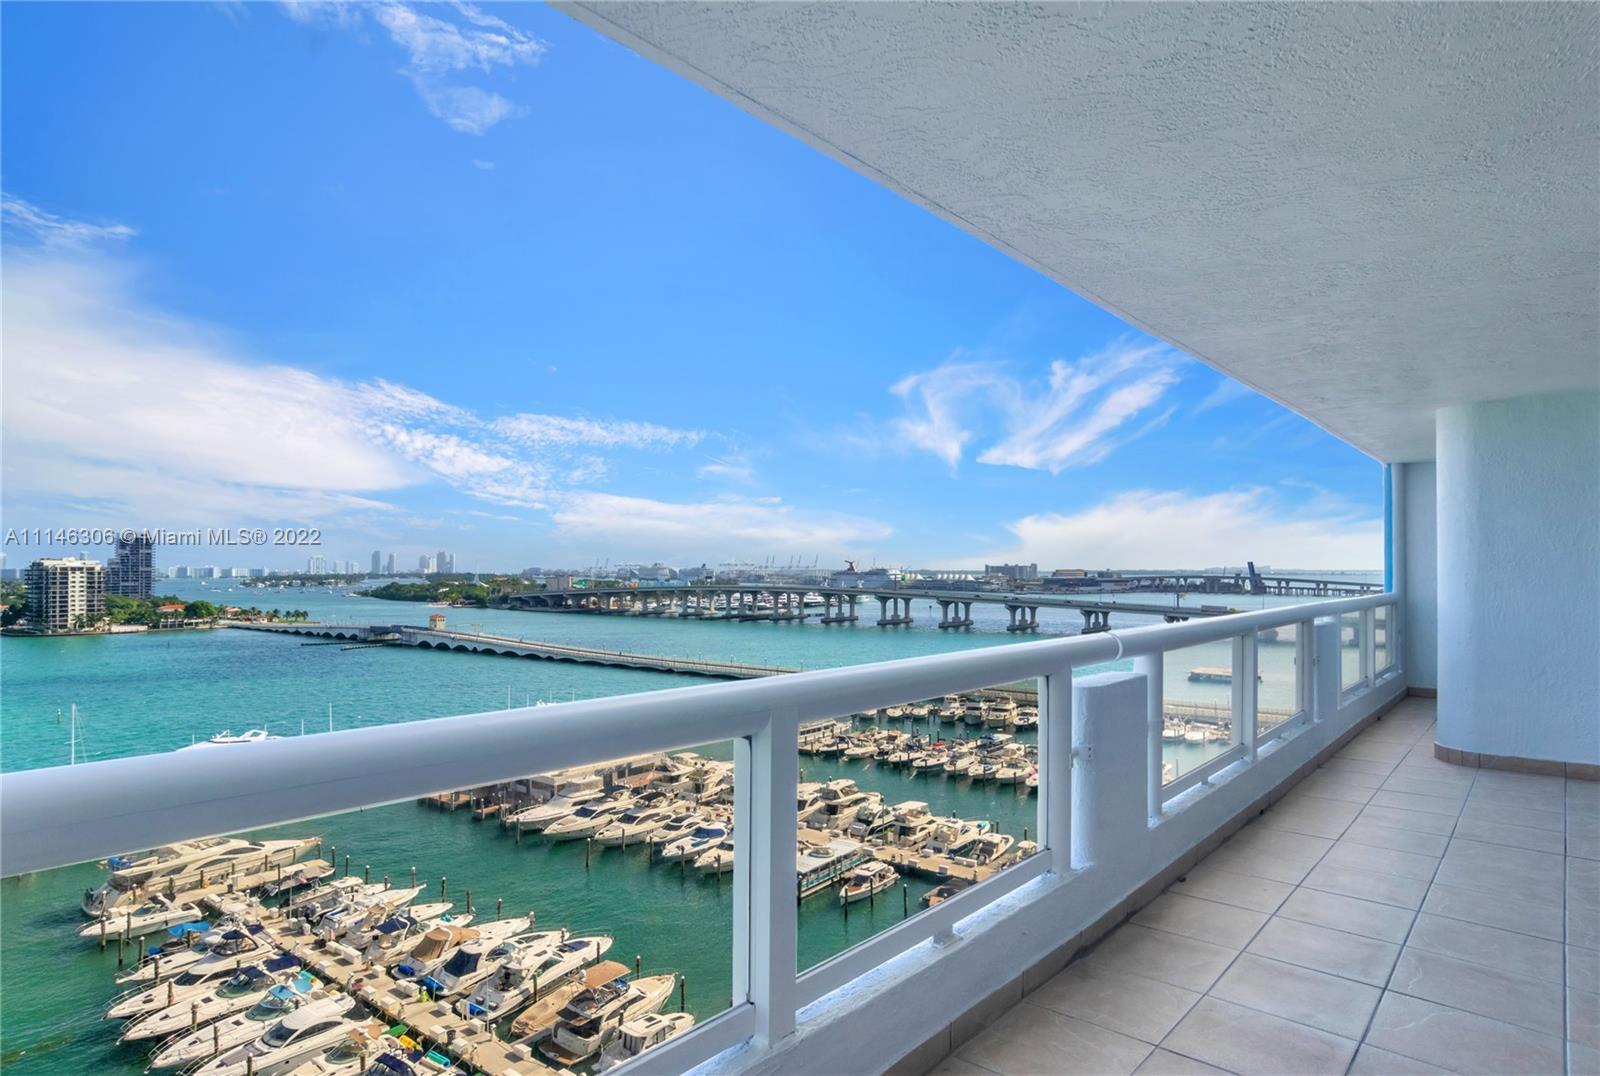 Newly renovated 2/2 unit directly on the water at The Grand. Condo is in just-renovated condition, f